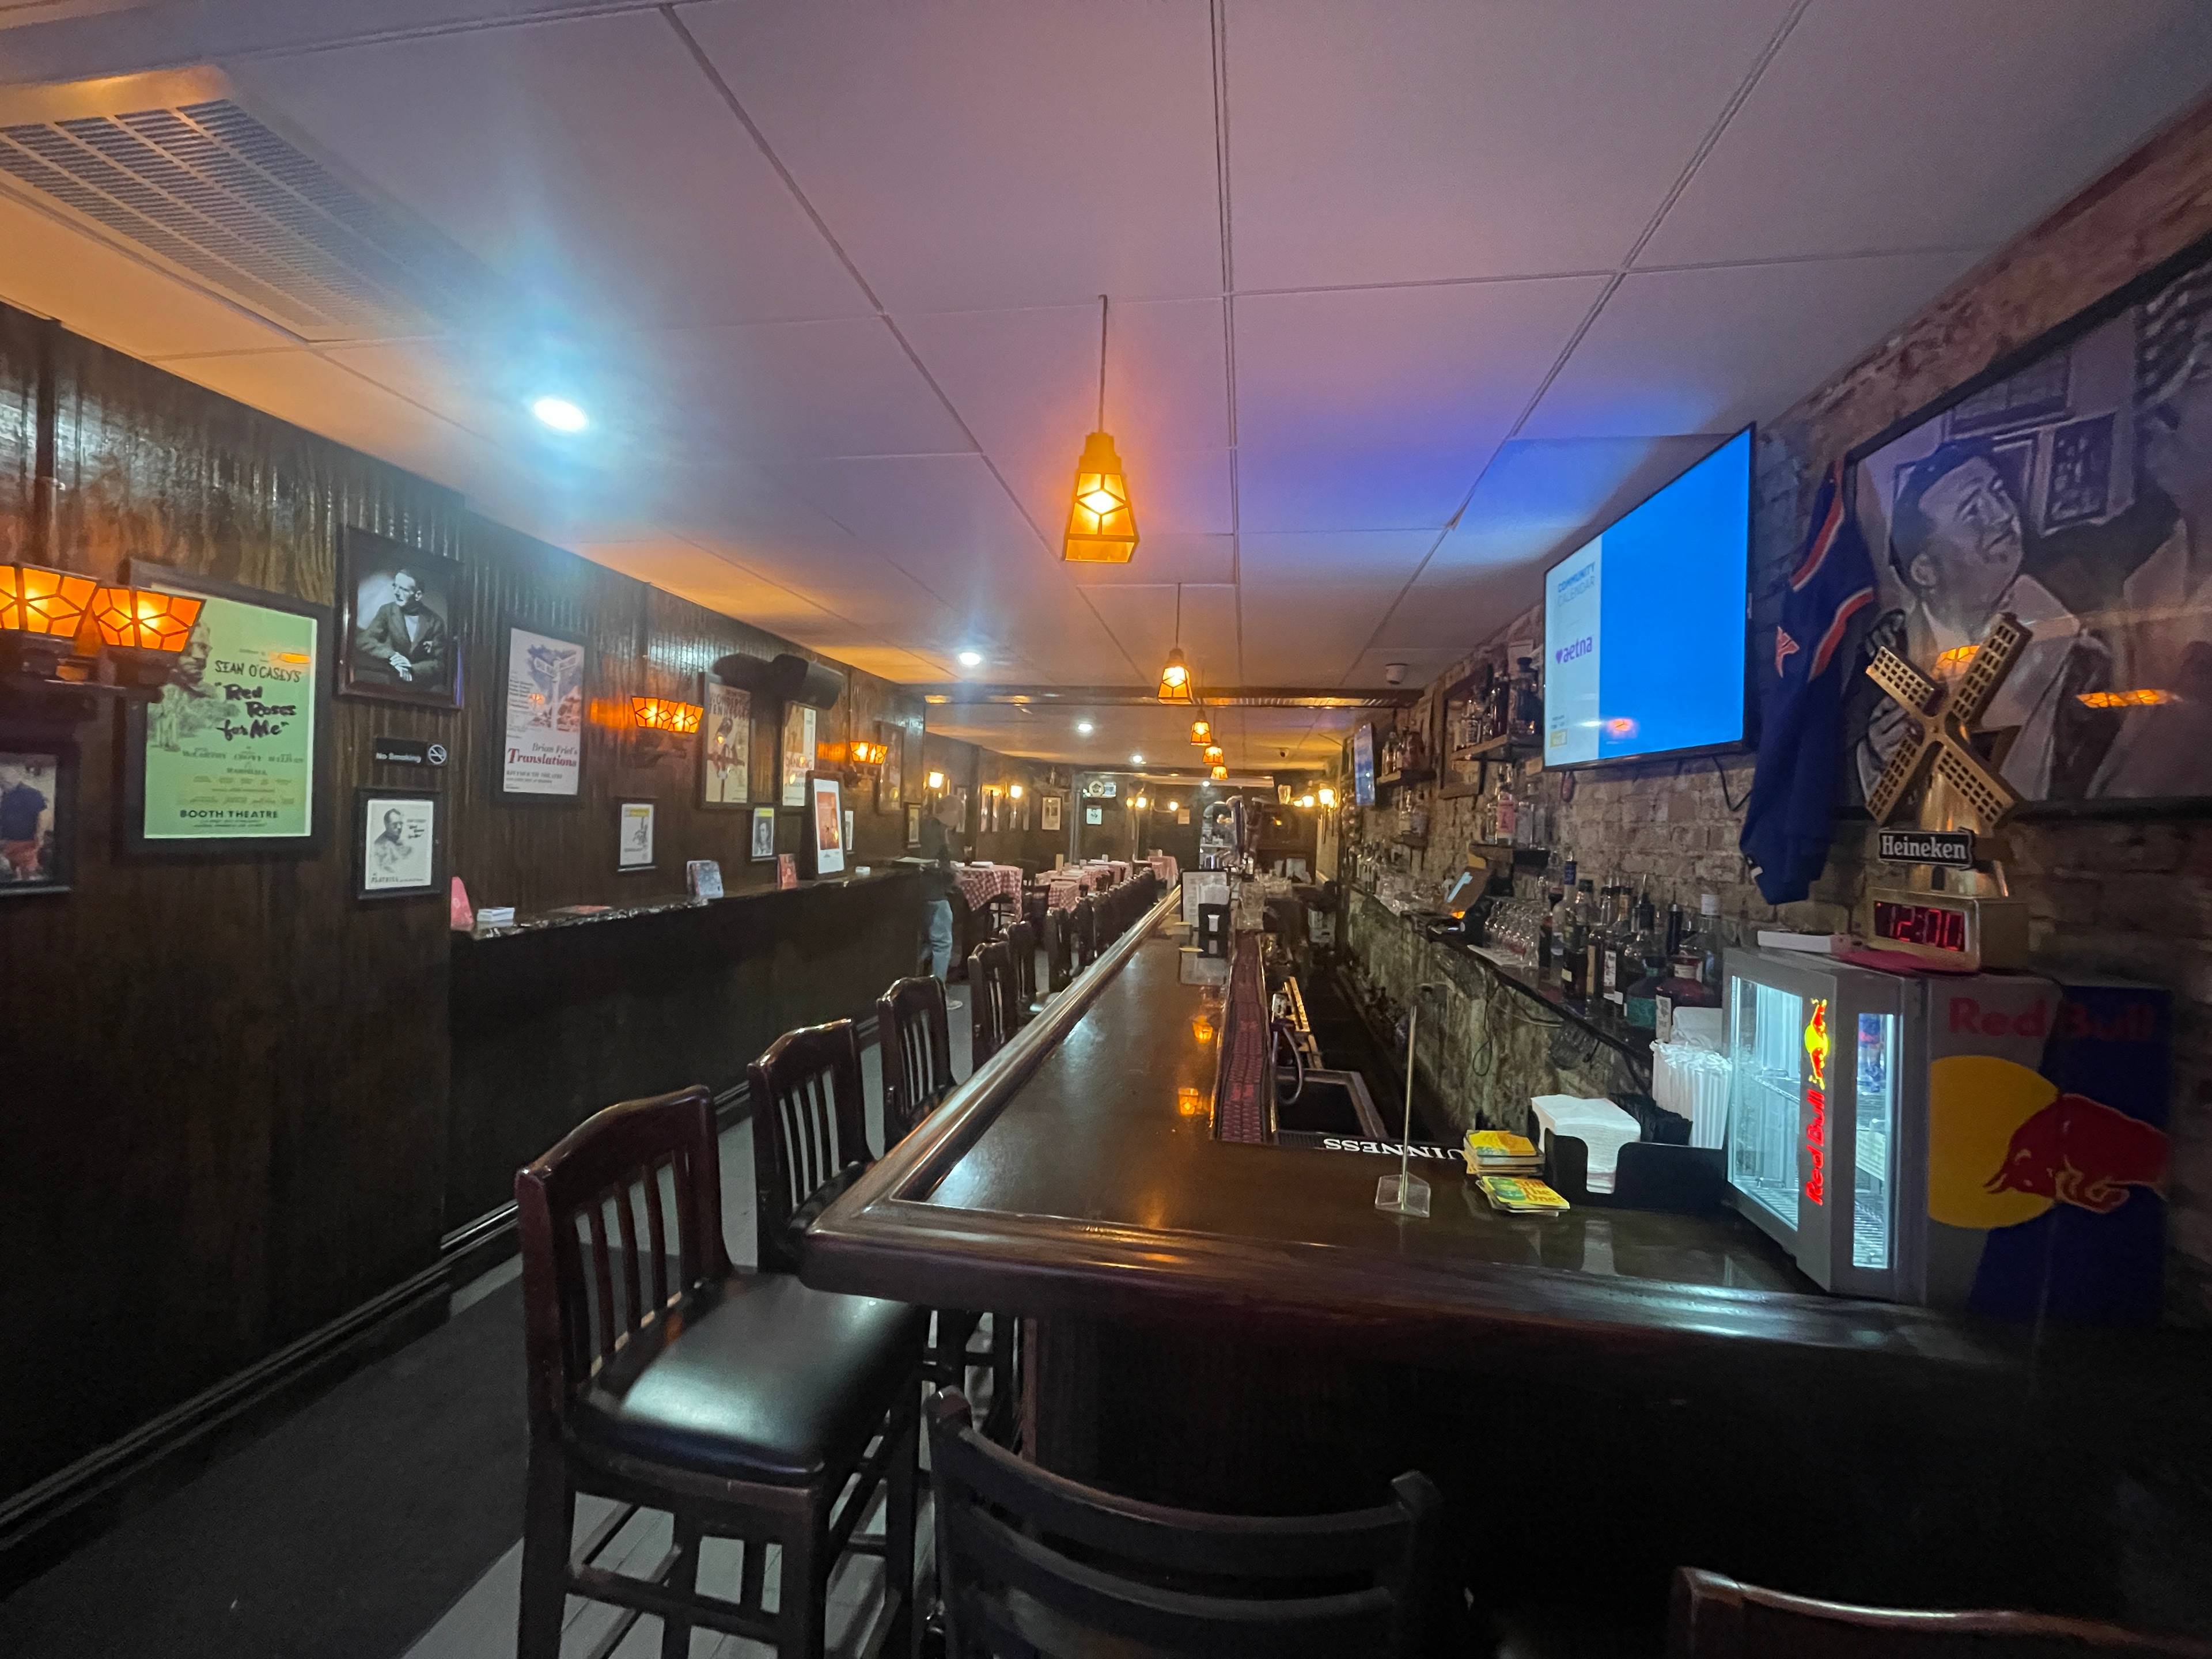 Times Square Restaurant For Sale!